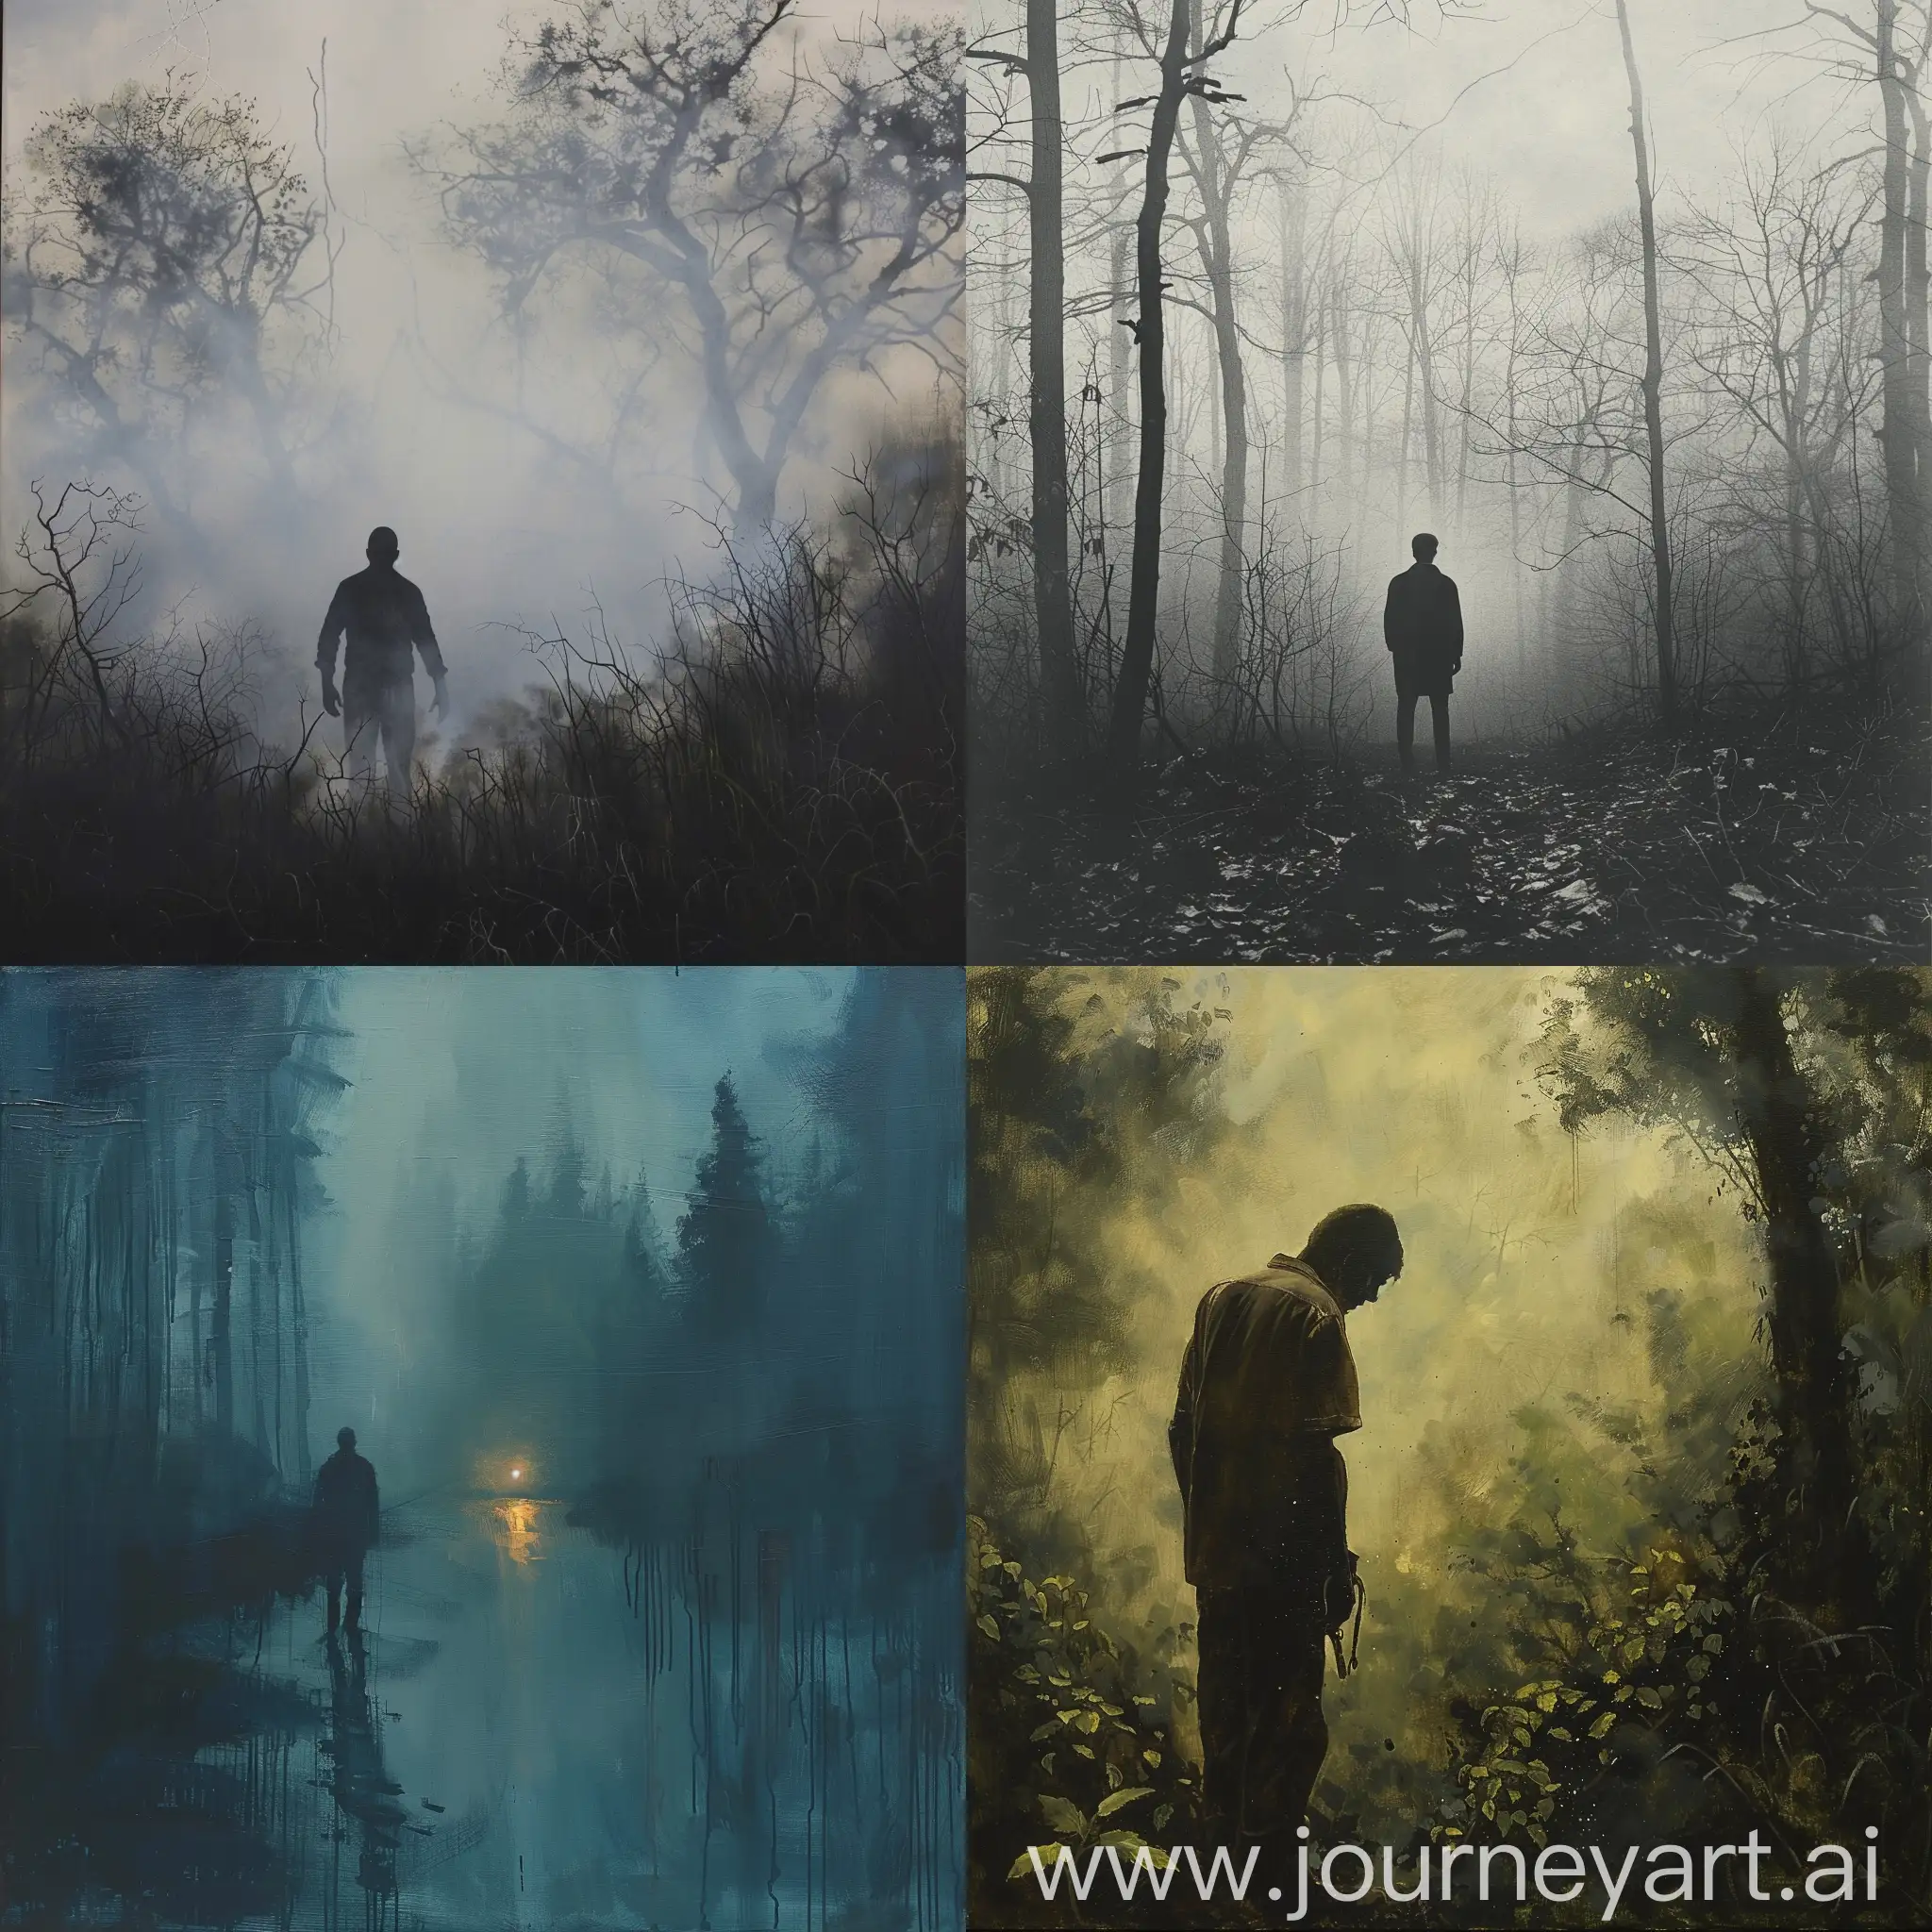 Solitary-Figure-Amidst-Enigmatic-Mist